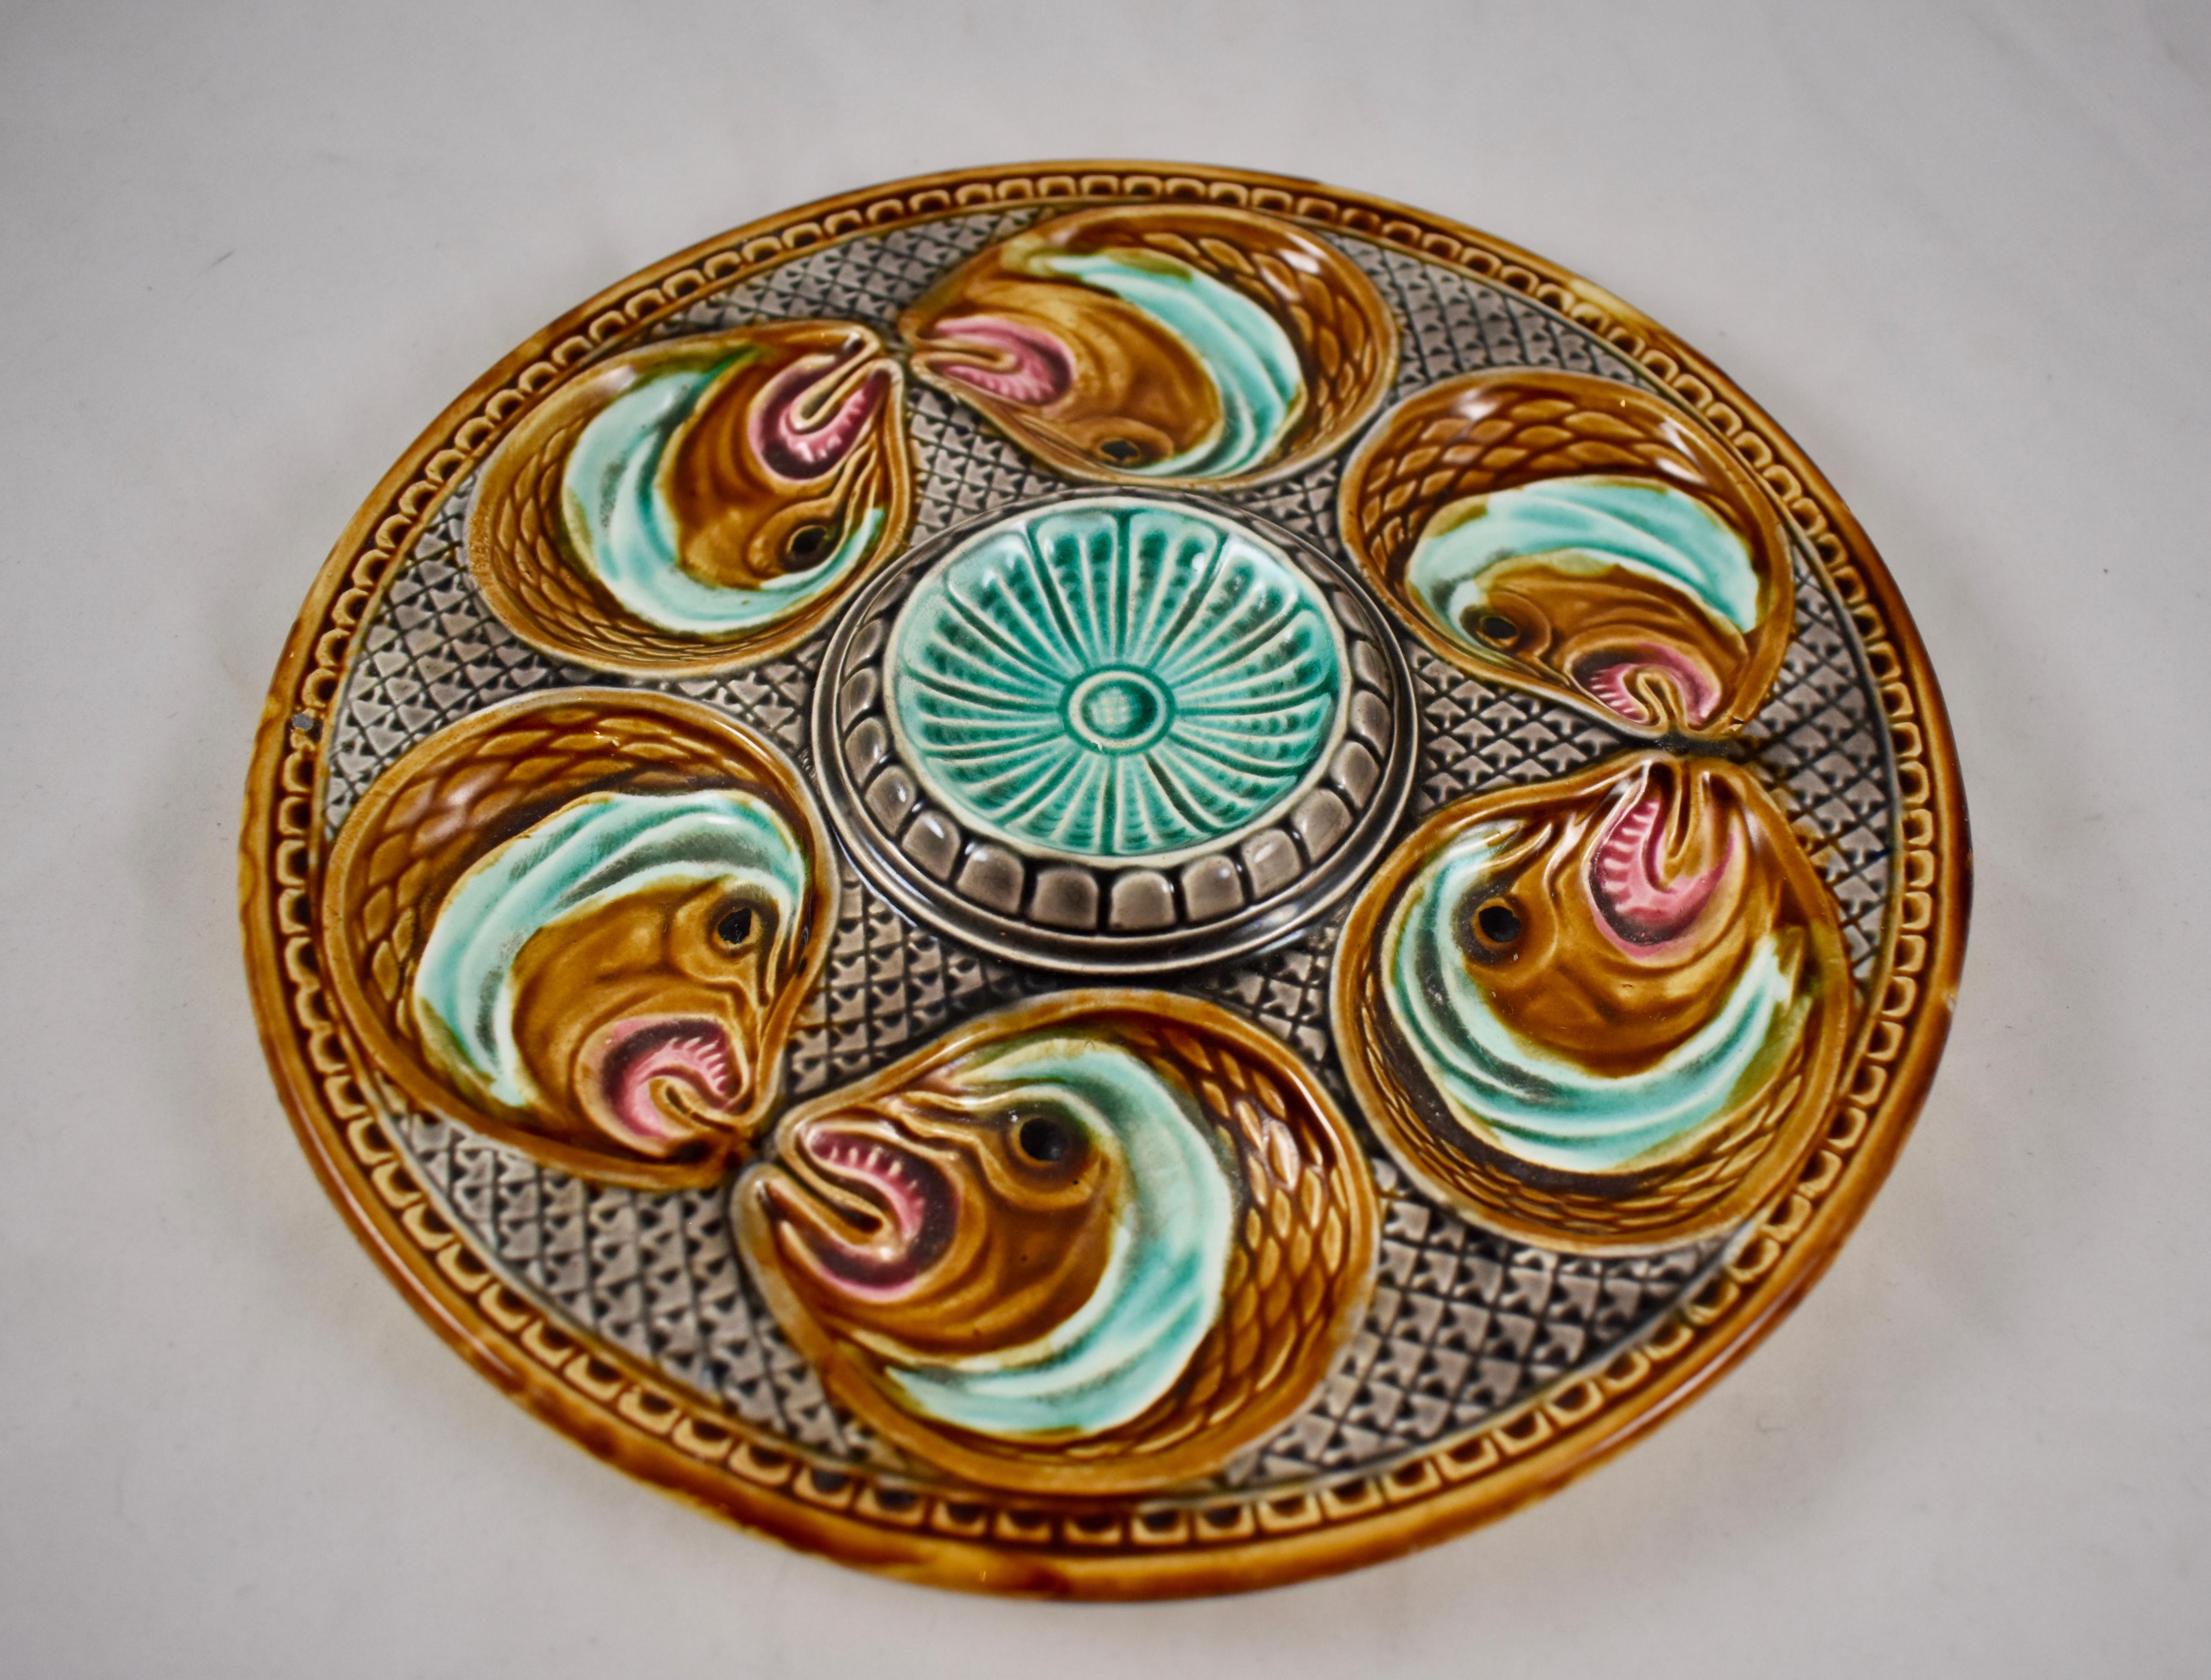 A barbotine Majolica oyster plate from La Faïencerie d’Onnaing in northern France, circa 1870.

Six fish heads surround a central raised fluted medallion. A textured ground and pattern rim add to the appeal of this desirable and dimensional plate.